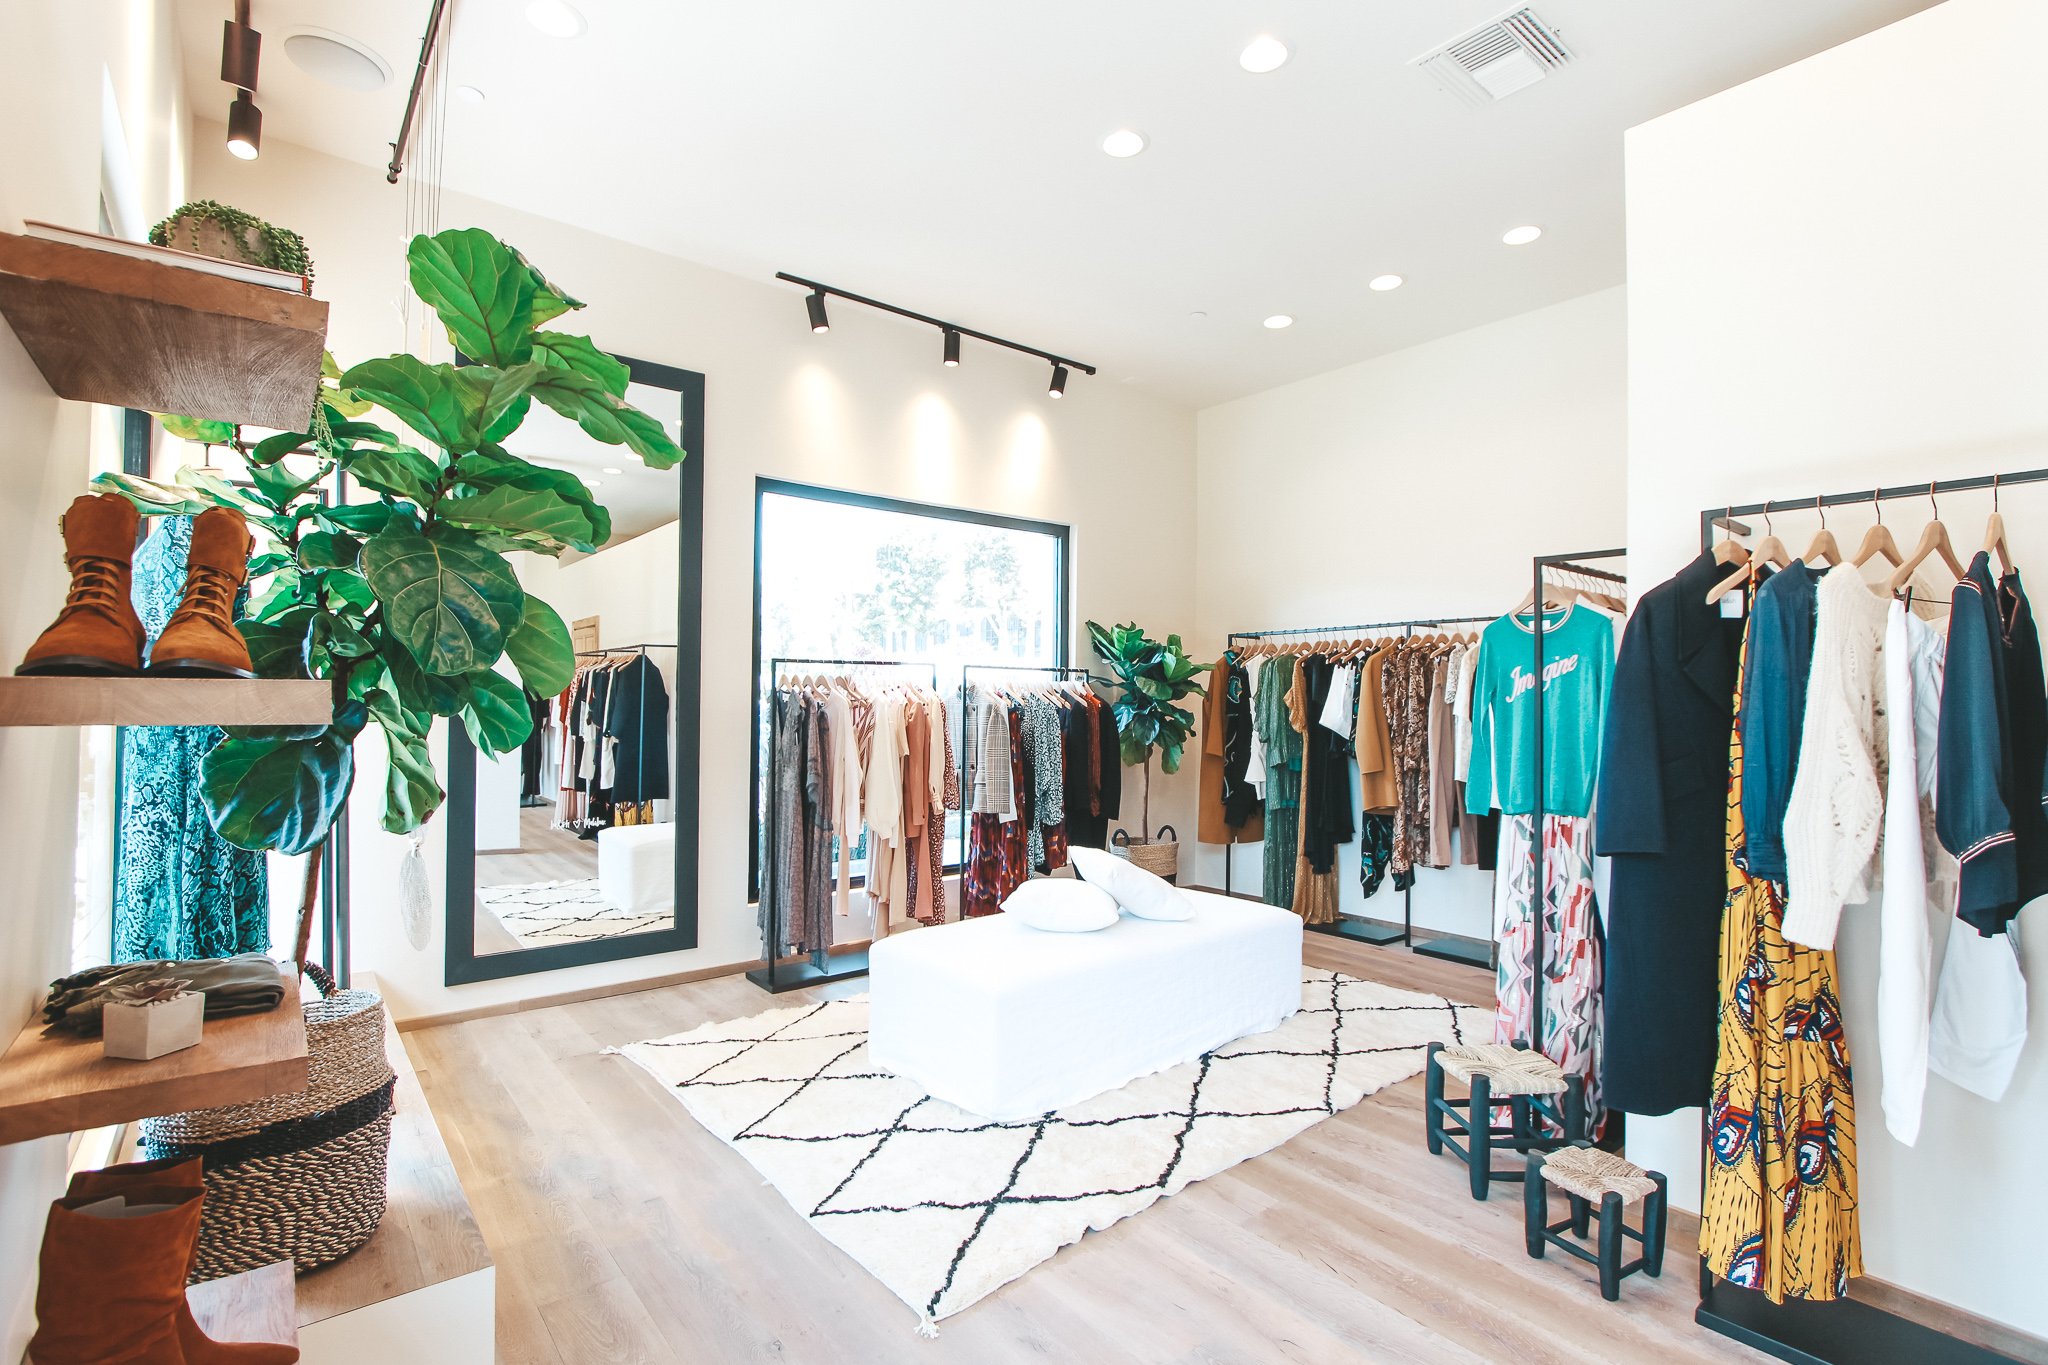 Malibu Country Mart - ba&sh is now open for in-store shopping at Malibu  Country Mart! They are currently offering 50% off nearly the entire Summer  2020 collection including perfect picnic dresses, breezy